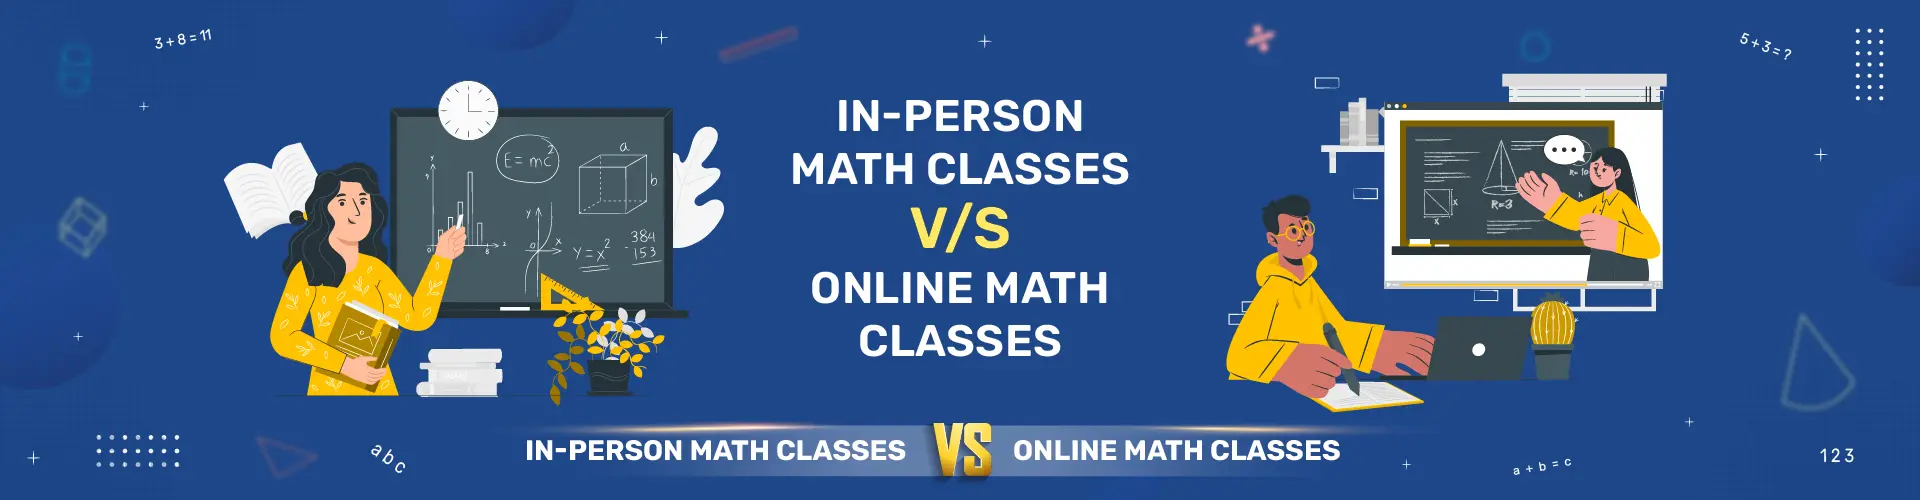 In-person Math Classes vs Online Math Classes for Kids